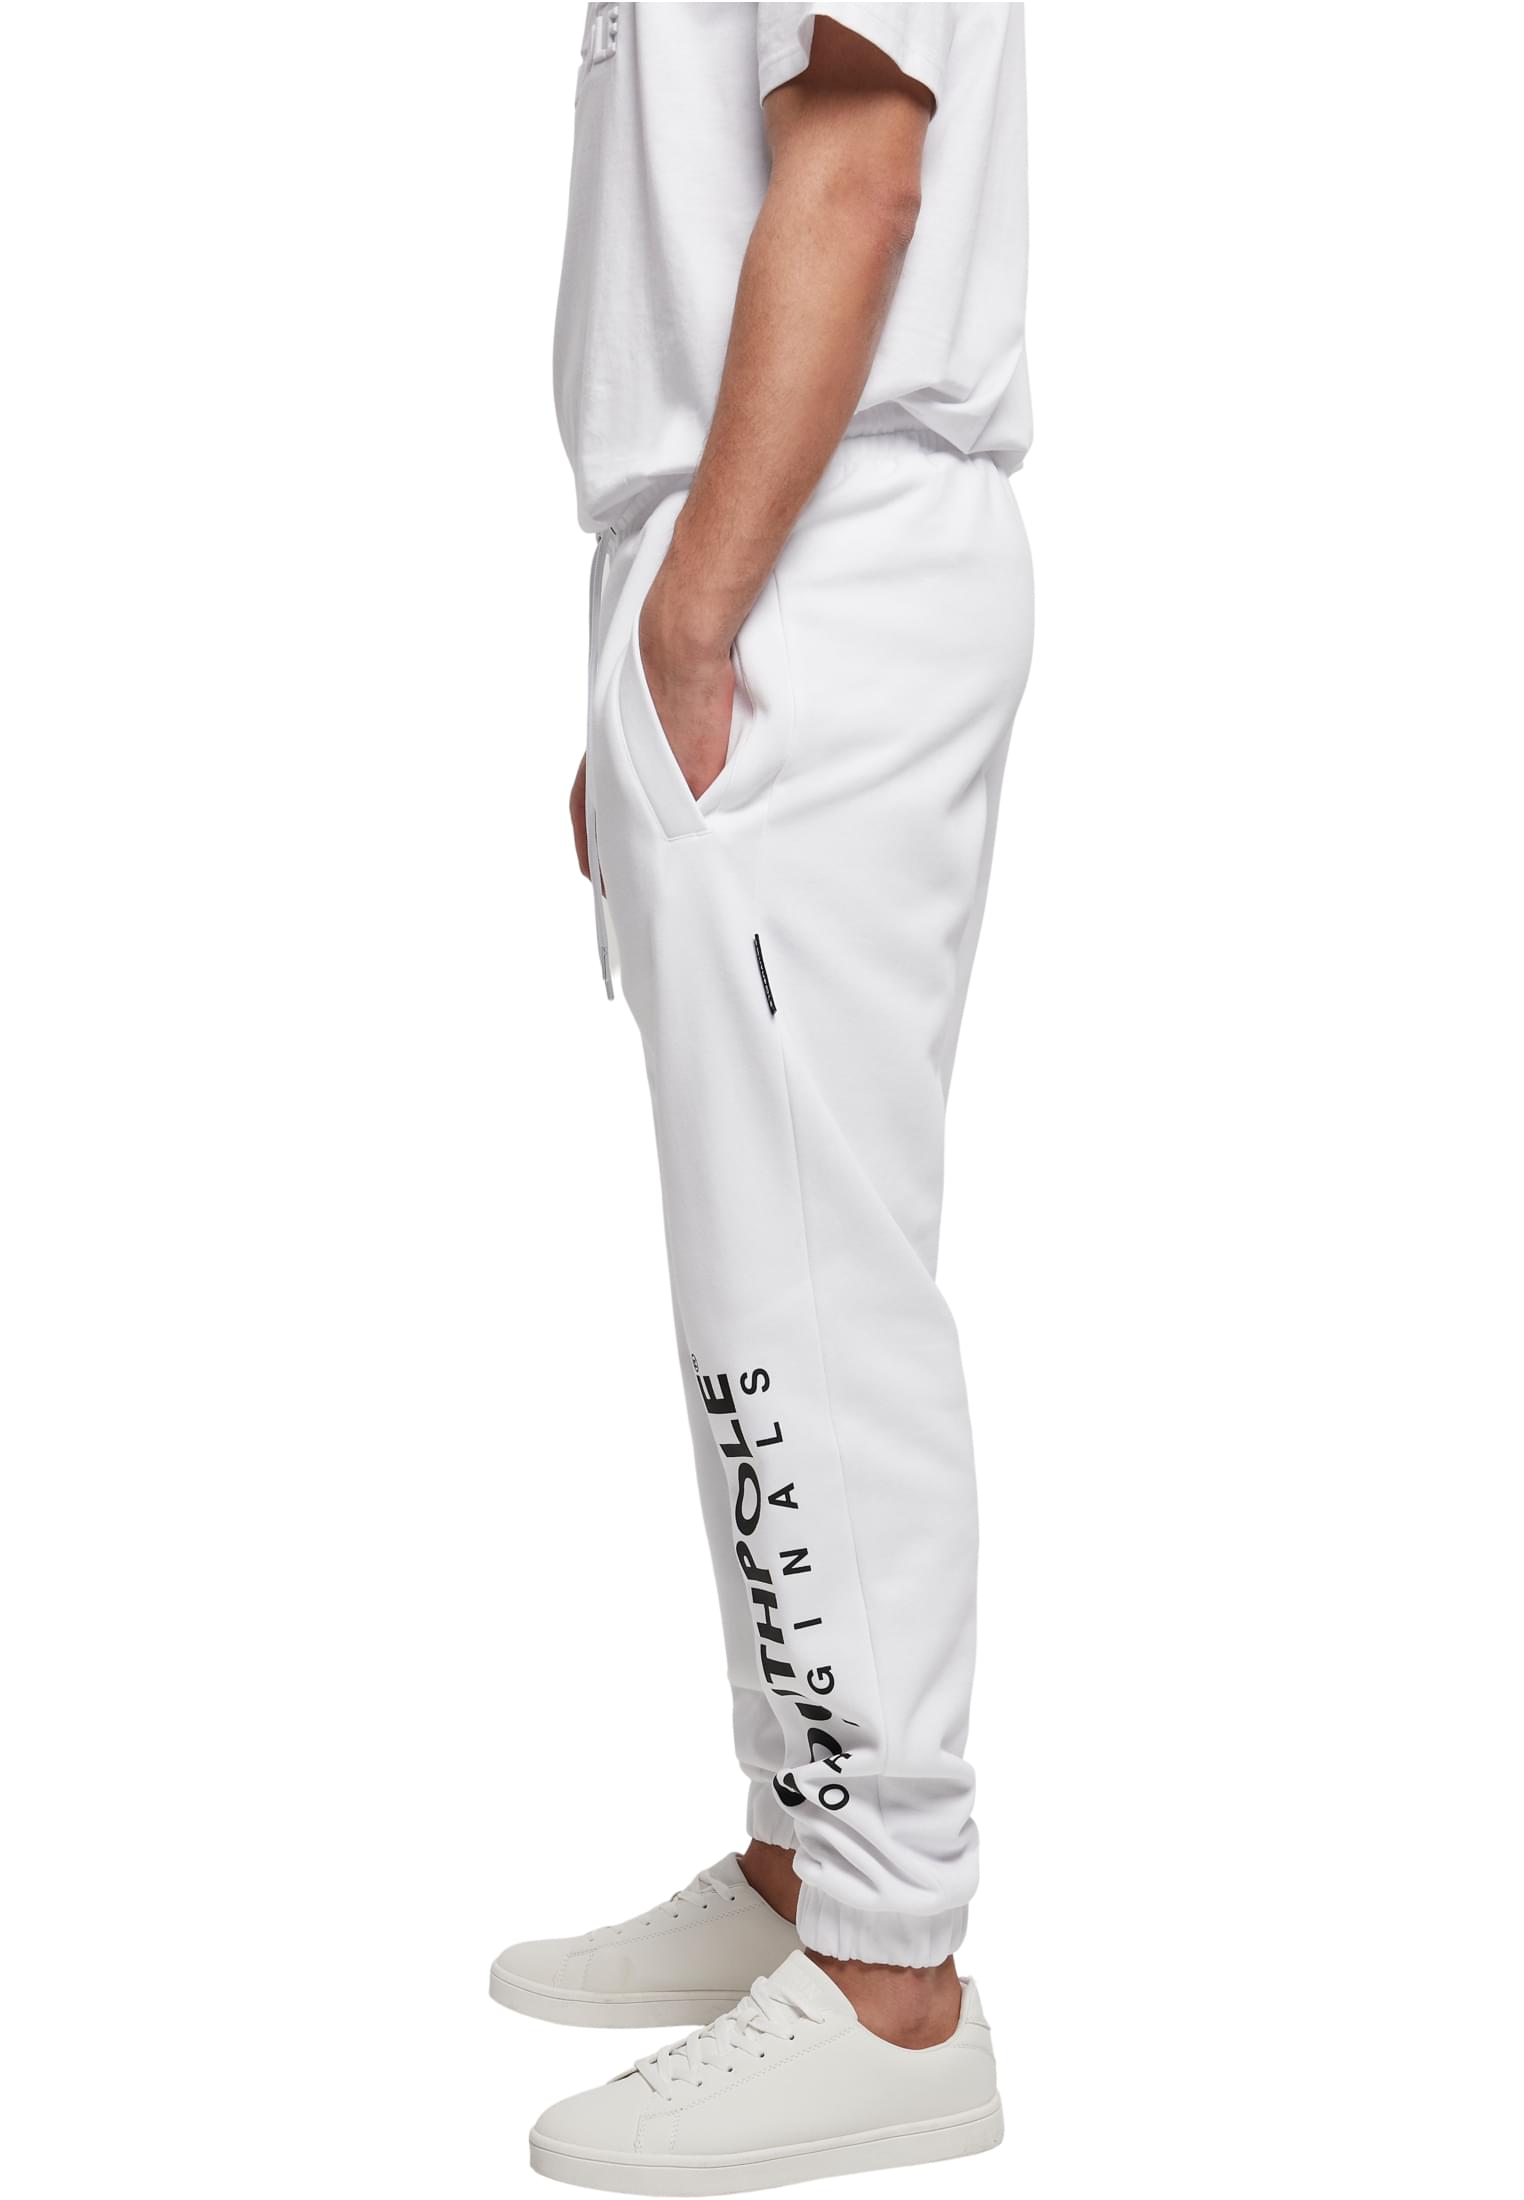 Saisonware Southpole Basic Sweat Pants in Farbe white